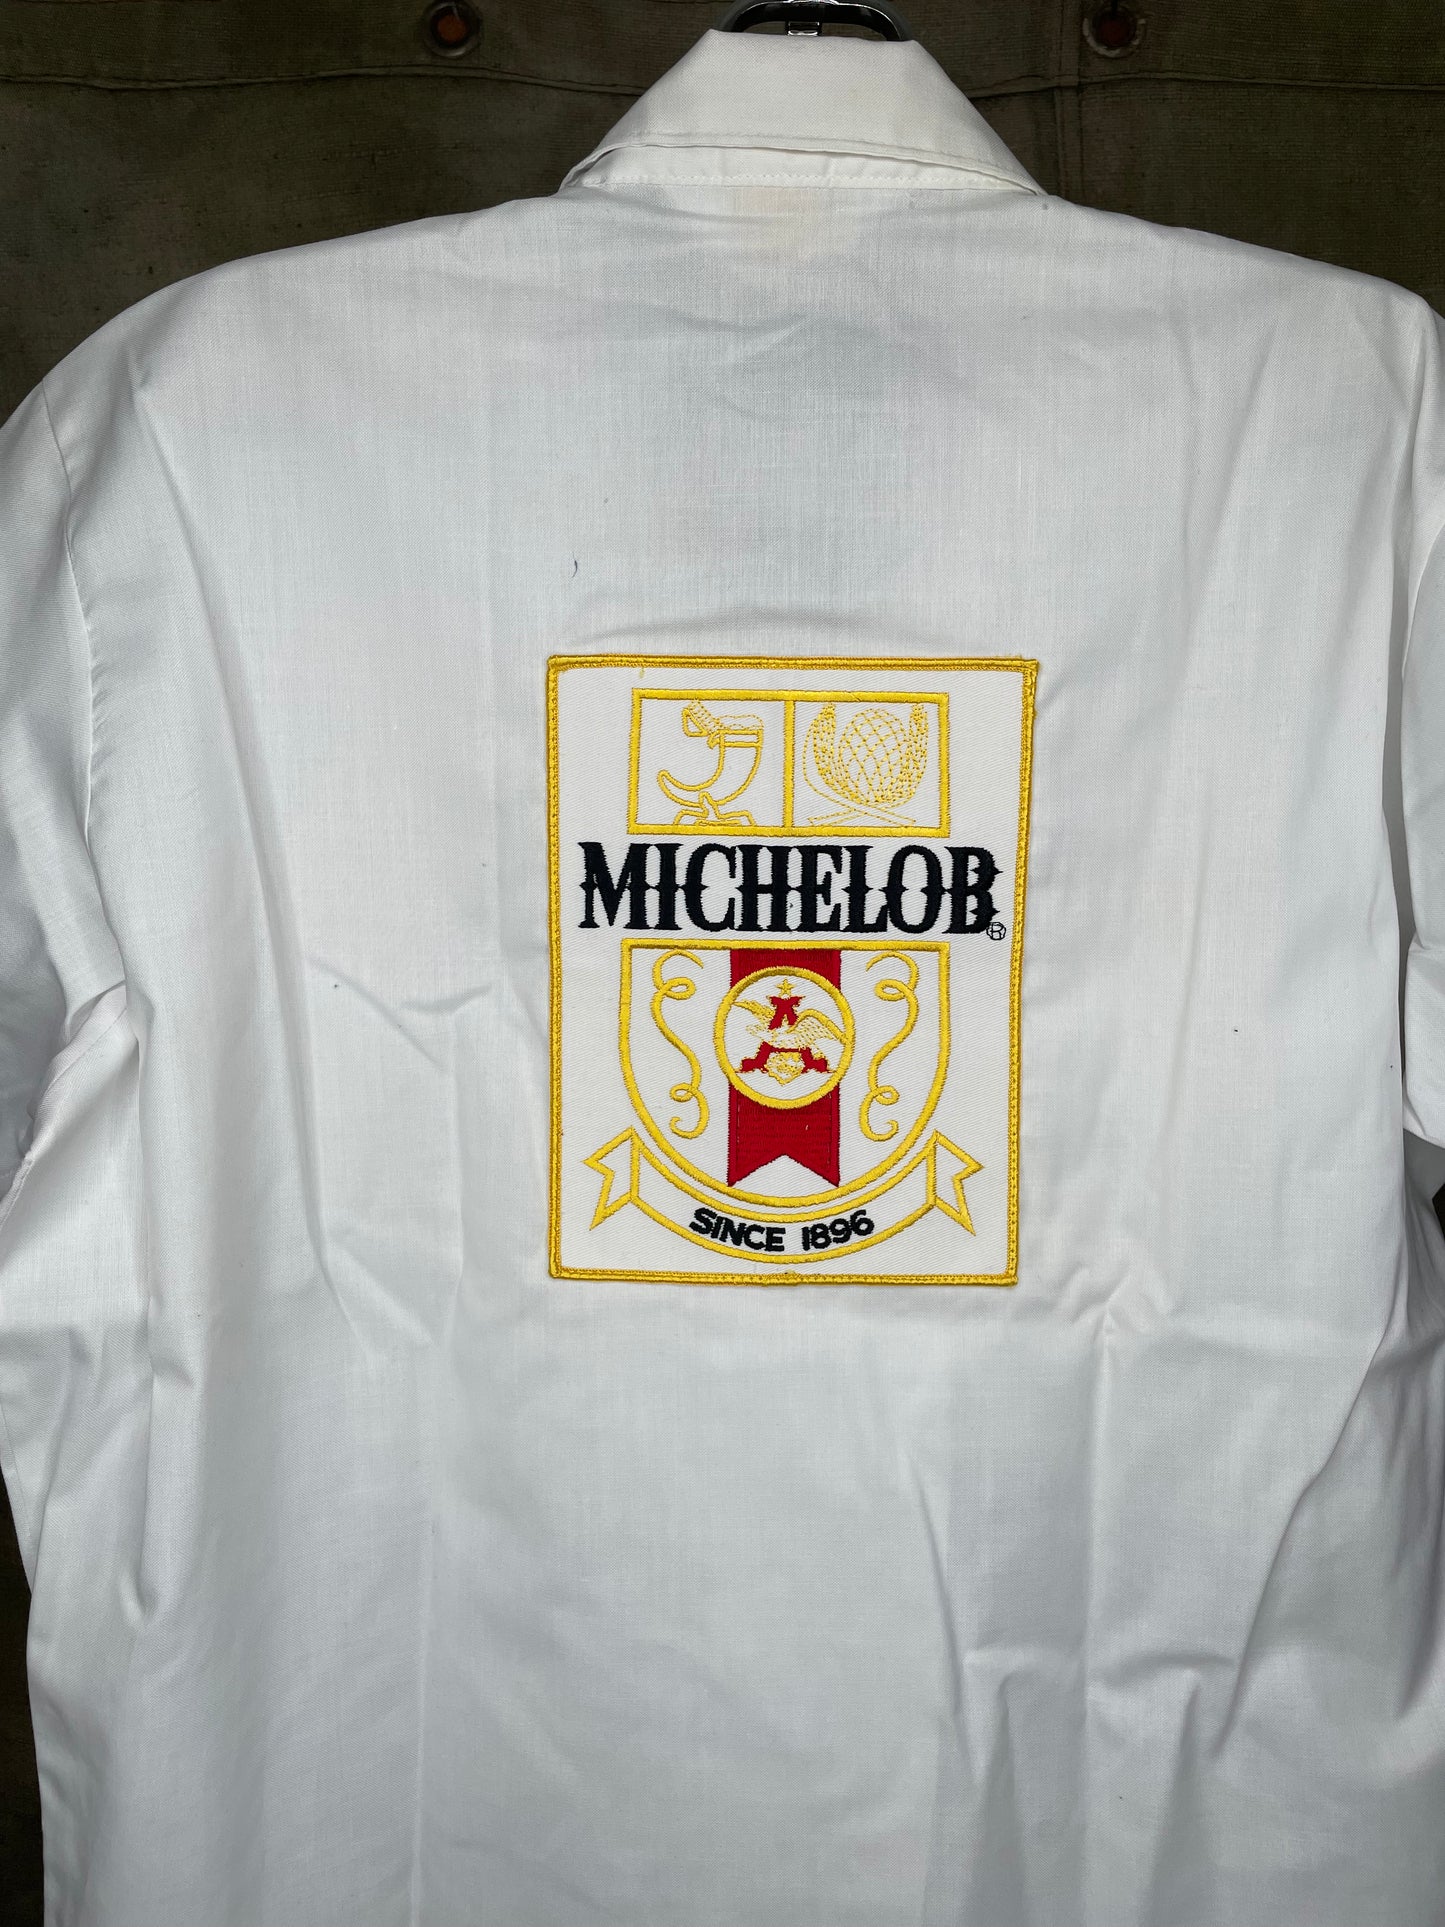 Vintage Michelob Beer Work Shirt NOS Patches Sz L